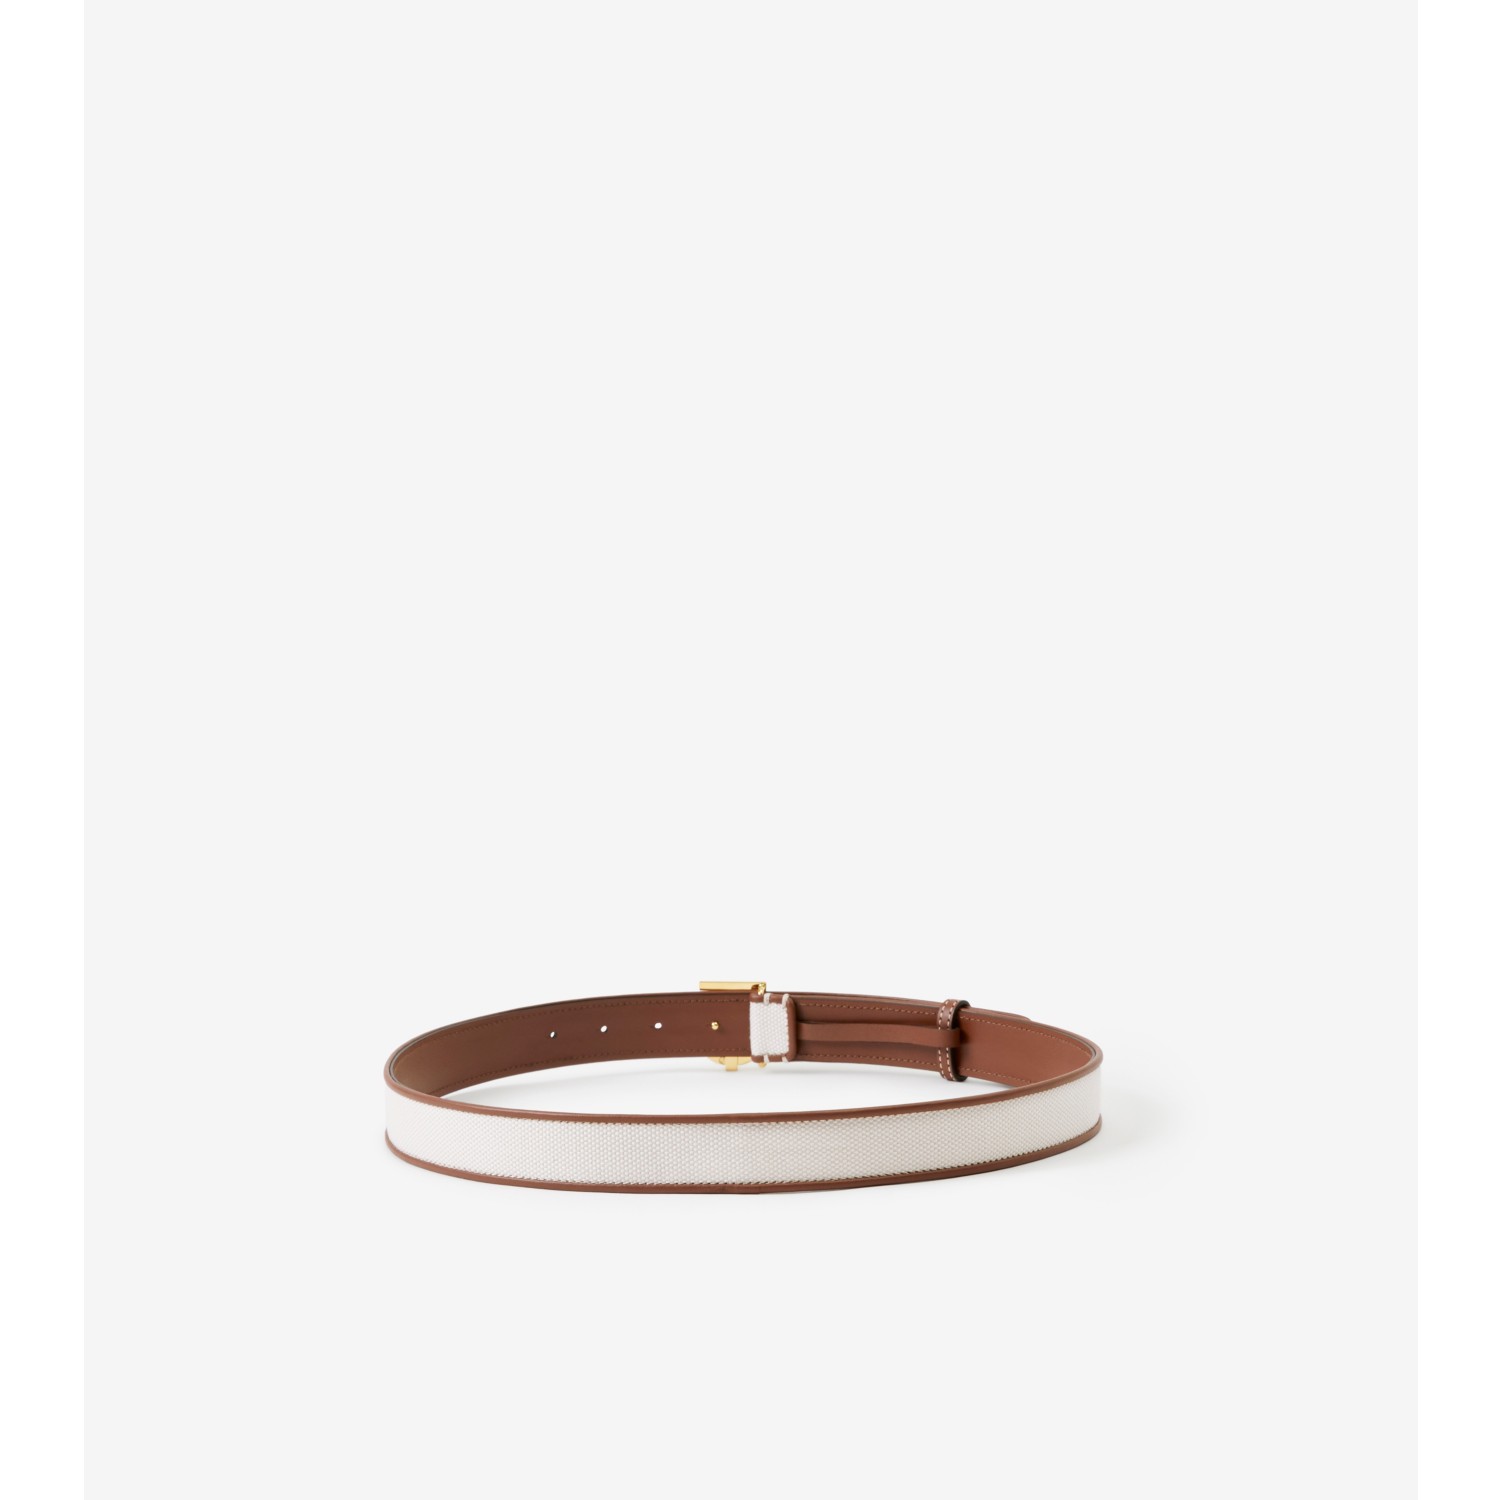 Burberry Canvas and Leather TB Belt , Size: M